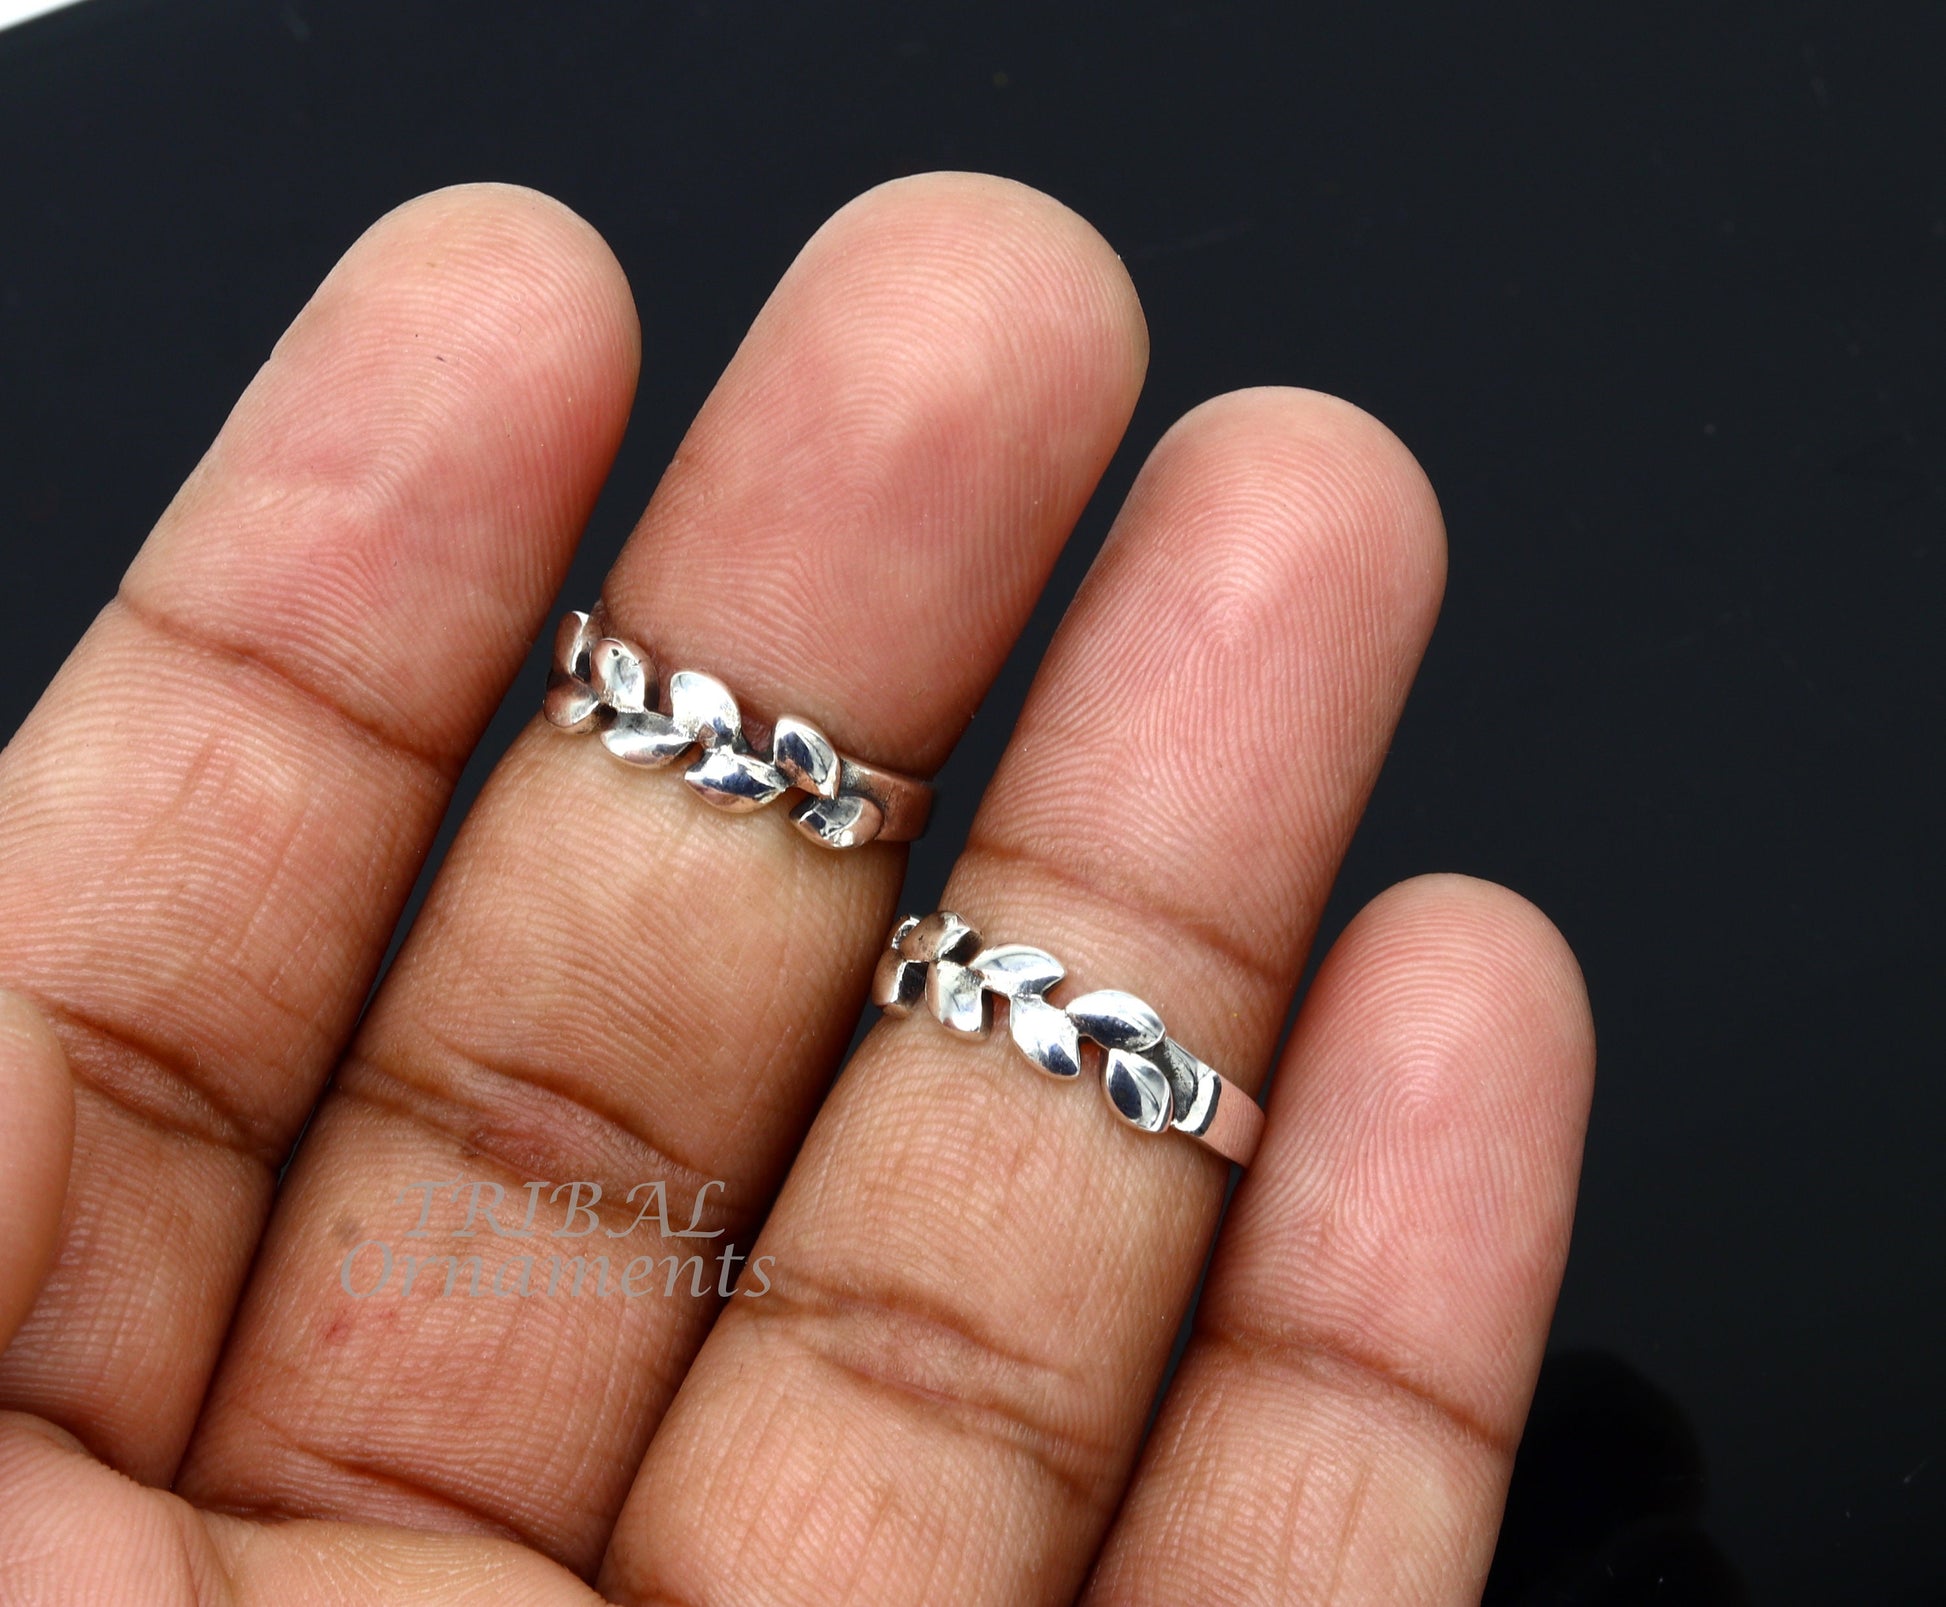 Fabulous flower design 92.5 sterling silver handmade vintage design Adjustable toe ring ethnic tribal belly dance jewelry india YTR03 - TRIBAL ORNAMENTS